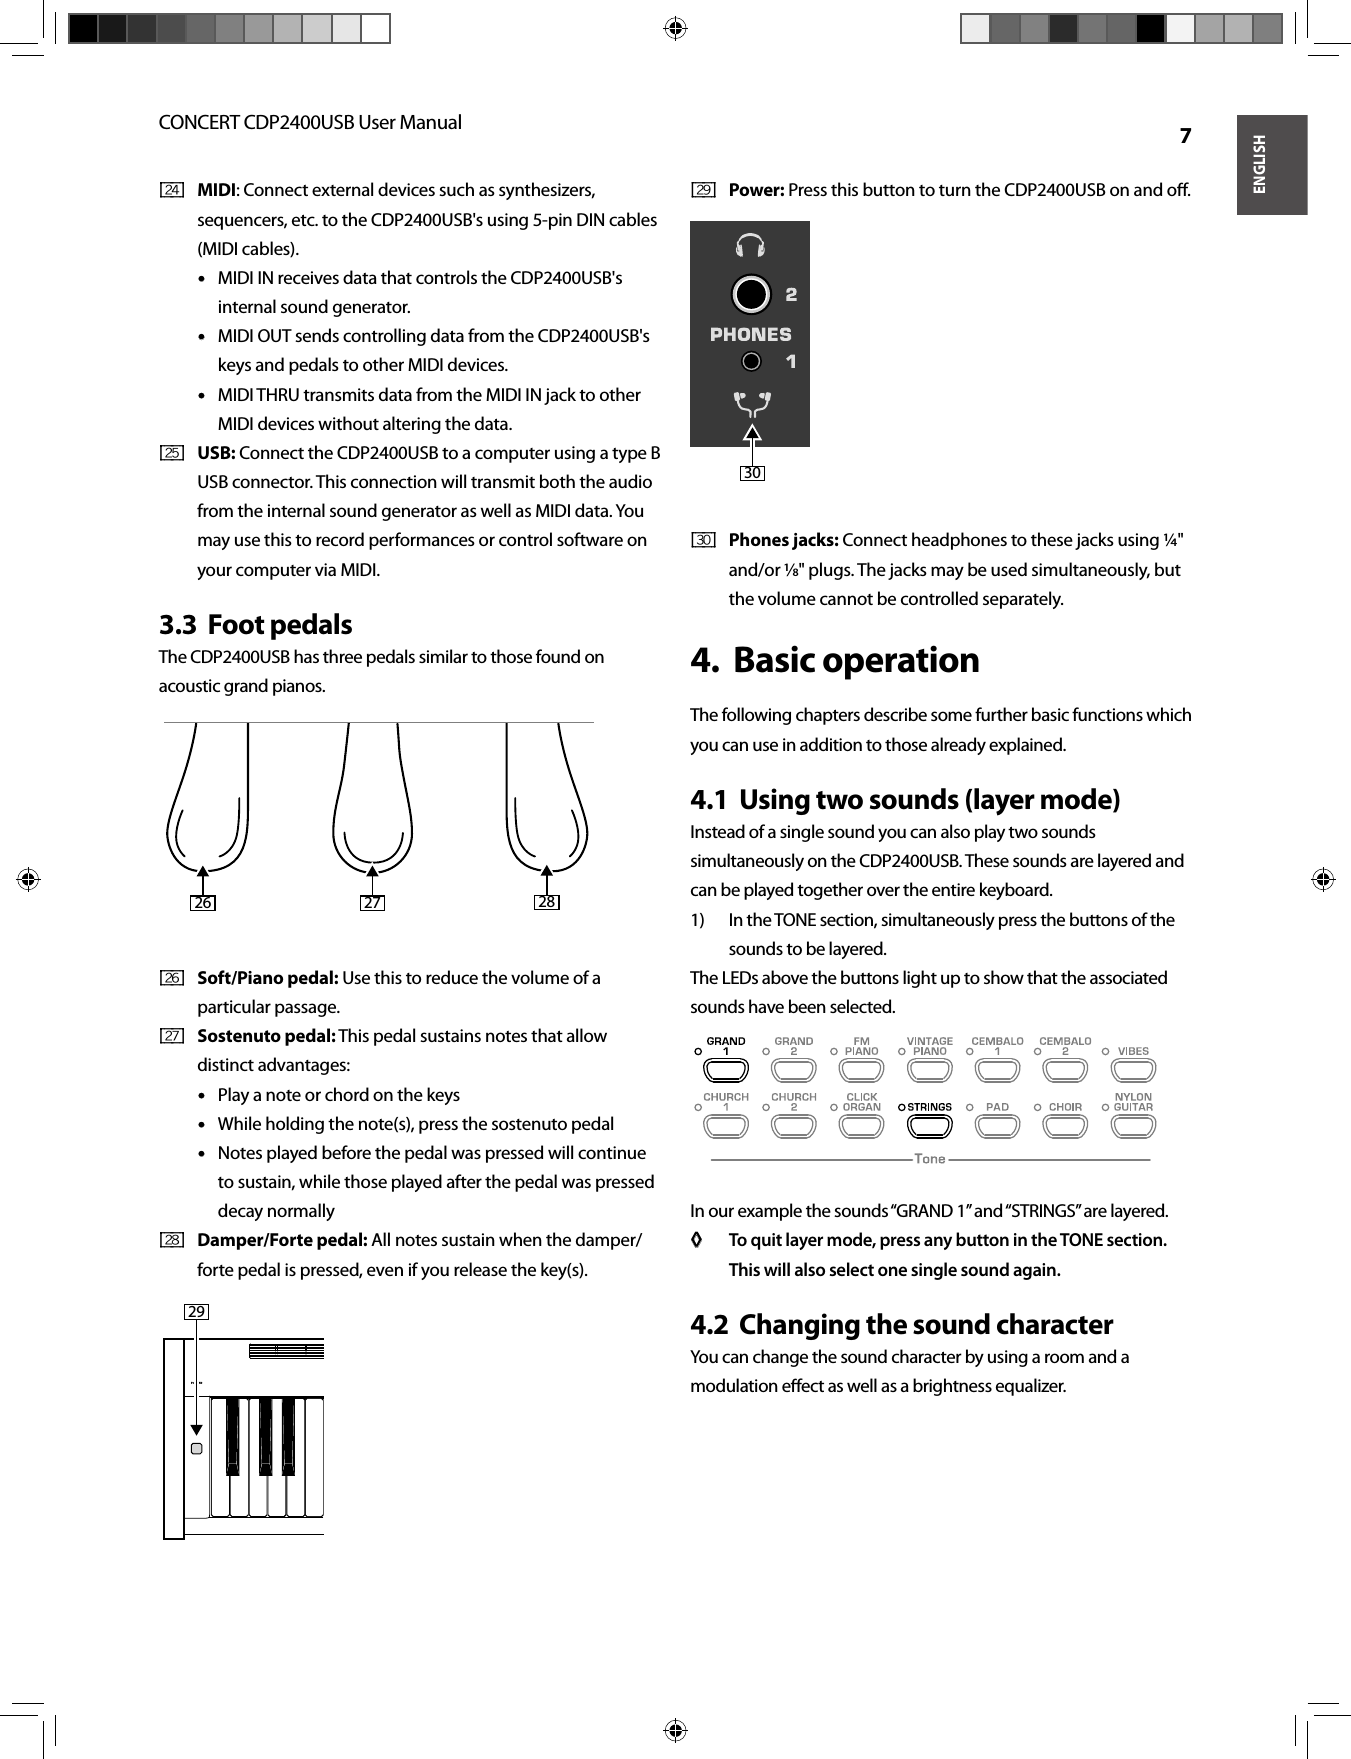 ENGLISHCONCERT CDP2400USB User Manual  7MIDI[ 24 ]  : Connect external devices such as synthesizers, sequencers, etc. to the CDP2400USB&apos;s using 5-pin DIN cables (MIDI cables). MIDI IN receives data that controls the CDP2400USB&apos;s • • internal sound generator. MIDI OUT sends controlling data from the CDP2400USB&apos;s • • keys and pedals to other MIDI devices.MIDI THRU transmits data from the MIDI IN jack to other • • MIDI devices without altering the data. USB:[ 25 ]   Connect the CDP2400USB to a computer using a type B USB connector. This connection will transmit both the audio from the internal sound generator as well as MIDI data. You may use this to record performances or control software on your computer via MIDI. Foot pedals3.3  The CDP2400USB has three pedals similar to those found on acoustic grand pianos.Soft/Piano pedal:[ 26 ]   Use this to reduce the volume of a particular passage. Sostenuto pedal:[ 27 ]   This pedal sustains notes that allow distinct advantages:Play a note or chord on the keys• • While holding the note(s), press the sostenuto pedal• • Notes played before the pedal was pressed will continue • • to sustain, while those played after the pedal was pressed decay normallyDamper/Forte pedal:[ 28 ]   All notes sustain when the damper/forte pedal is pressed, even if you release the key(s).Power:[ 29 ]   Press this button to turn the CDP2400USB on and oﬀ .Phones jacks:[ 30 ]   Connect headphones to these jacks using ¼&quot; and/or ⁄&quot; plugs. The jacks may be used simultaneously, but the volume cannot be controlled separately. Basic operation4.  The following chapters describe some further basic functions which you can use in addition to those already explained.Using two sounds (layer mode)4.1  Instead of a single sound you can also play two sounds simultaneously on the CDP2400USB. These sounds are layered and can be played together over the entire keyboard.In the TONE section, simultaneously press the buttons of the 1) sounds to be layered.The LEDs above the buttons light up to show that the associated sounds have been selected.In our example the sounds “GRAND 1” and “STRINGS” are layered.To quit layer mode, press any button in the TONE section. ◊ ◊ This will also select one single sound again.Changing the sound character4.2  You can change the sound character by using a room and a modulation eﬀ ect as well as a brightness equalizer.26 27 282930